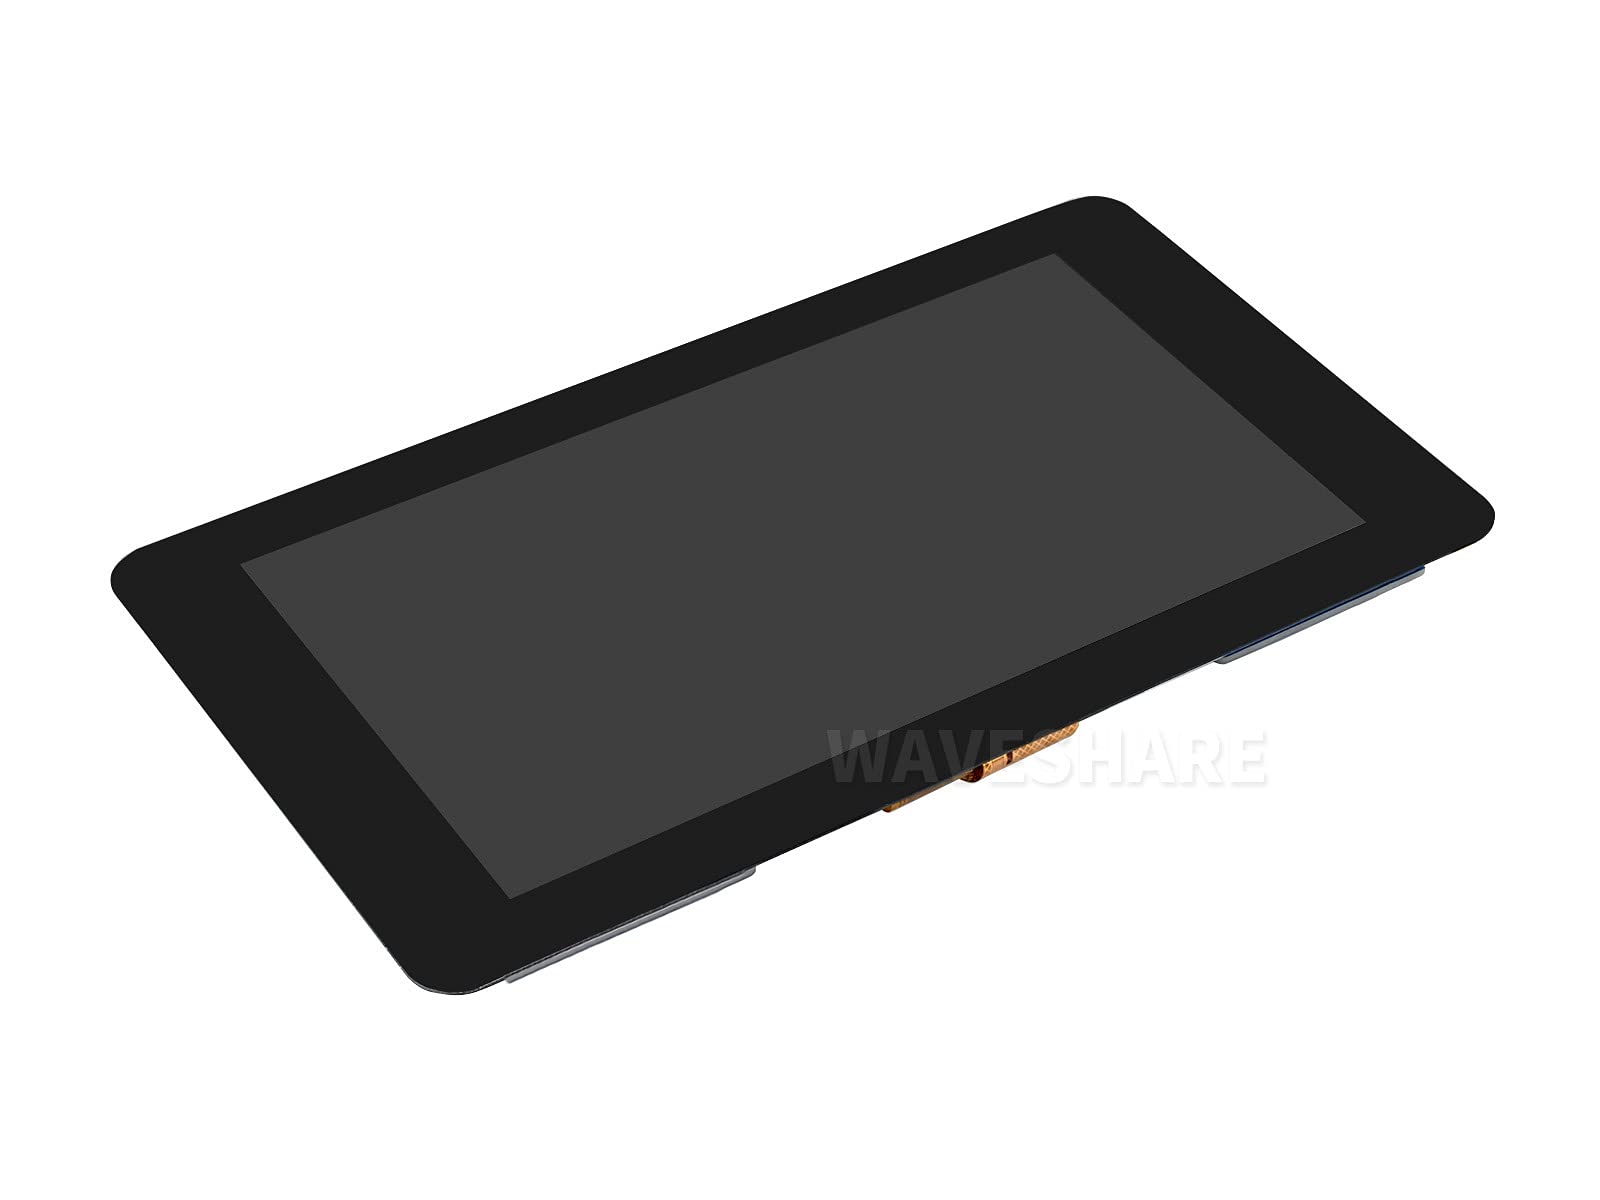 7inch DSI LCD 1024x600 Capacitive Touch IPS Display for Raspberry Pi 4B/3B+/3A+/Compute Module 4/3+, Refresh Rate up to 60Hz